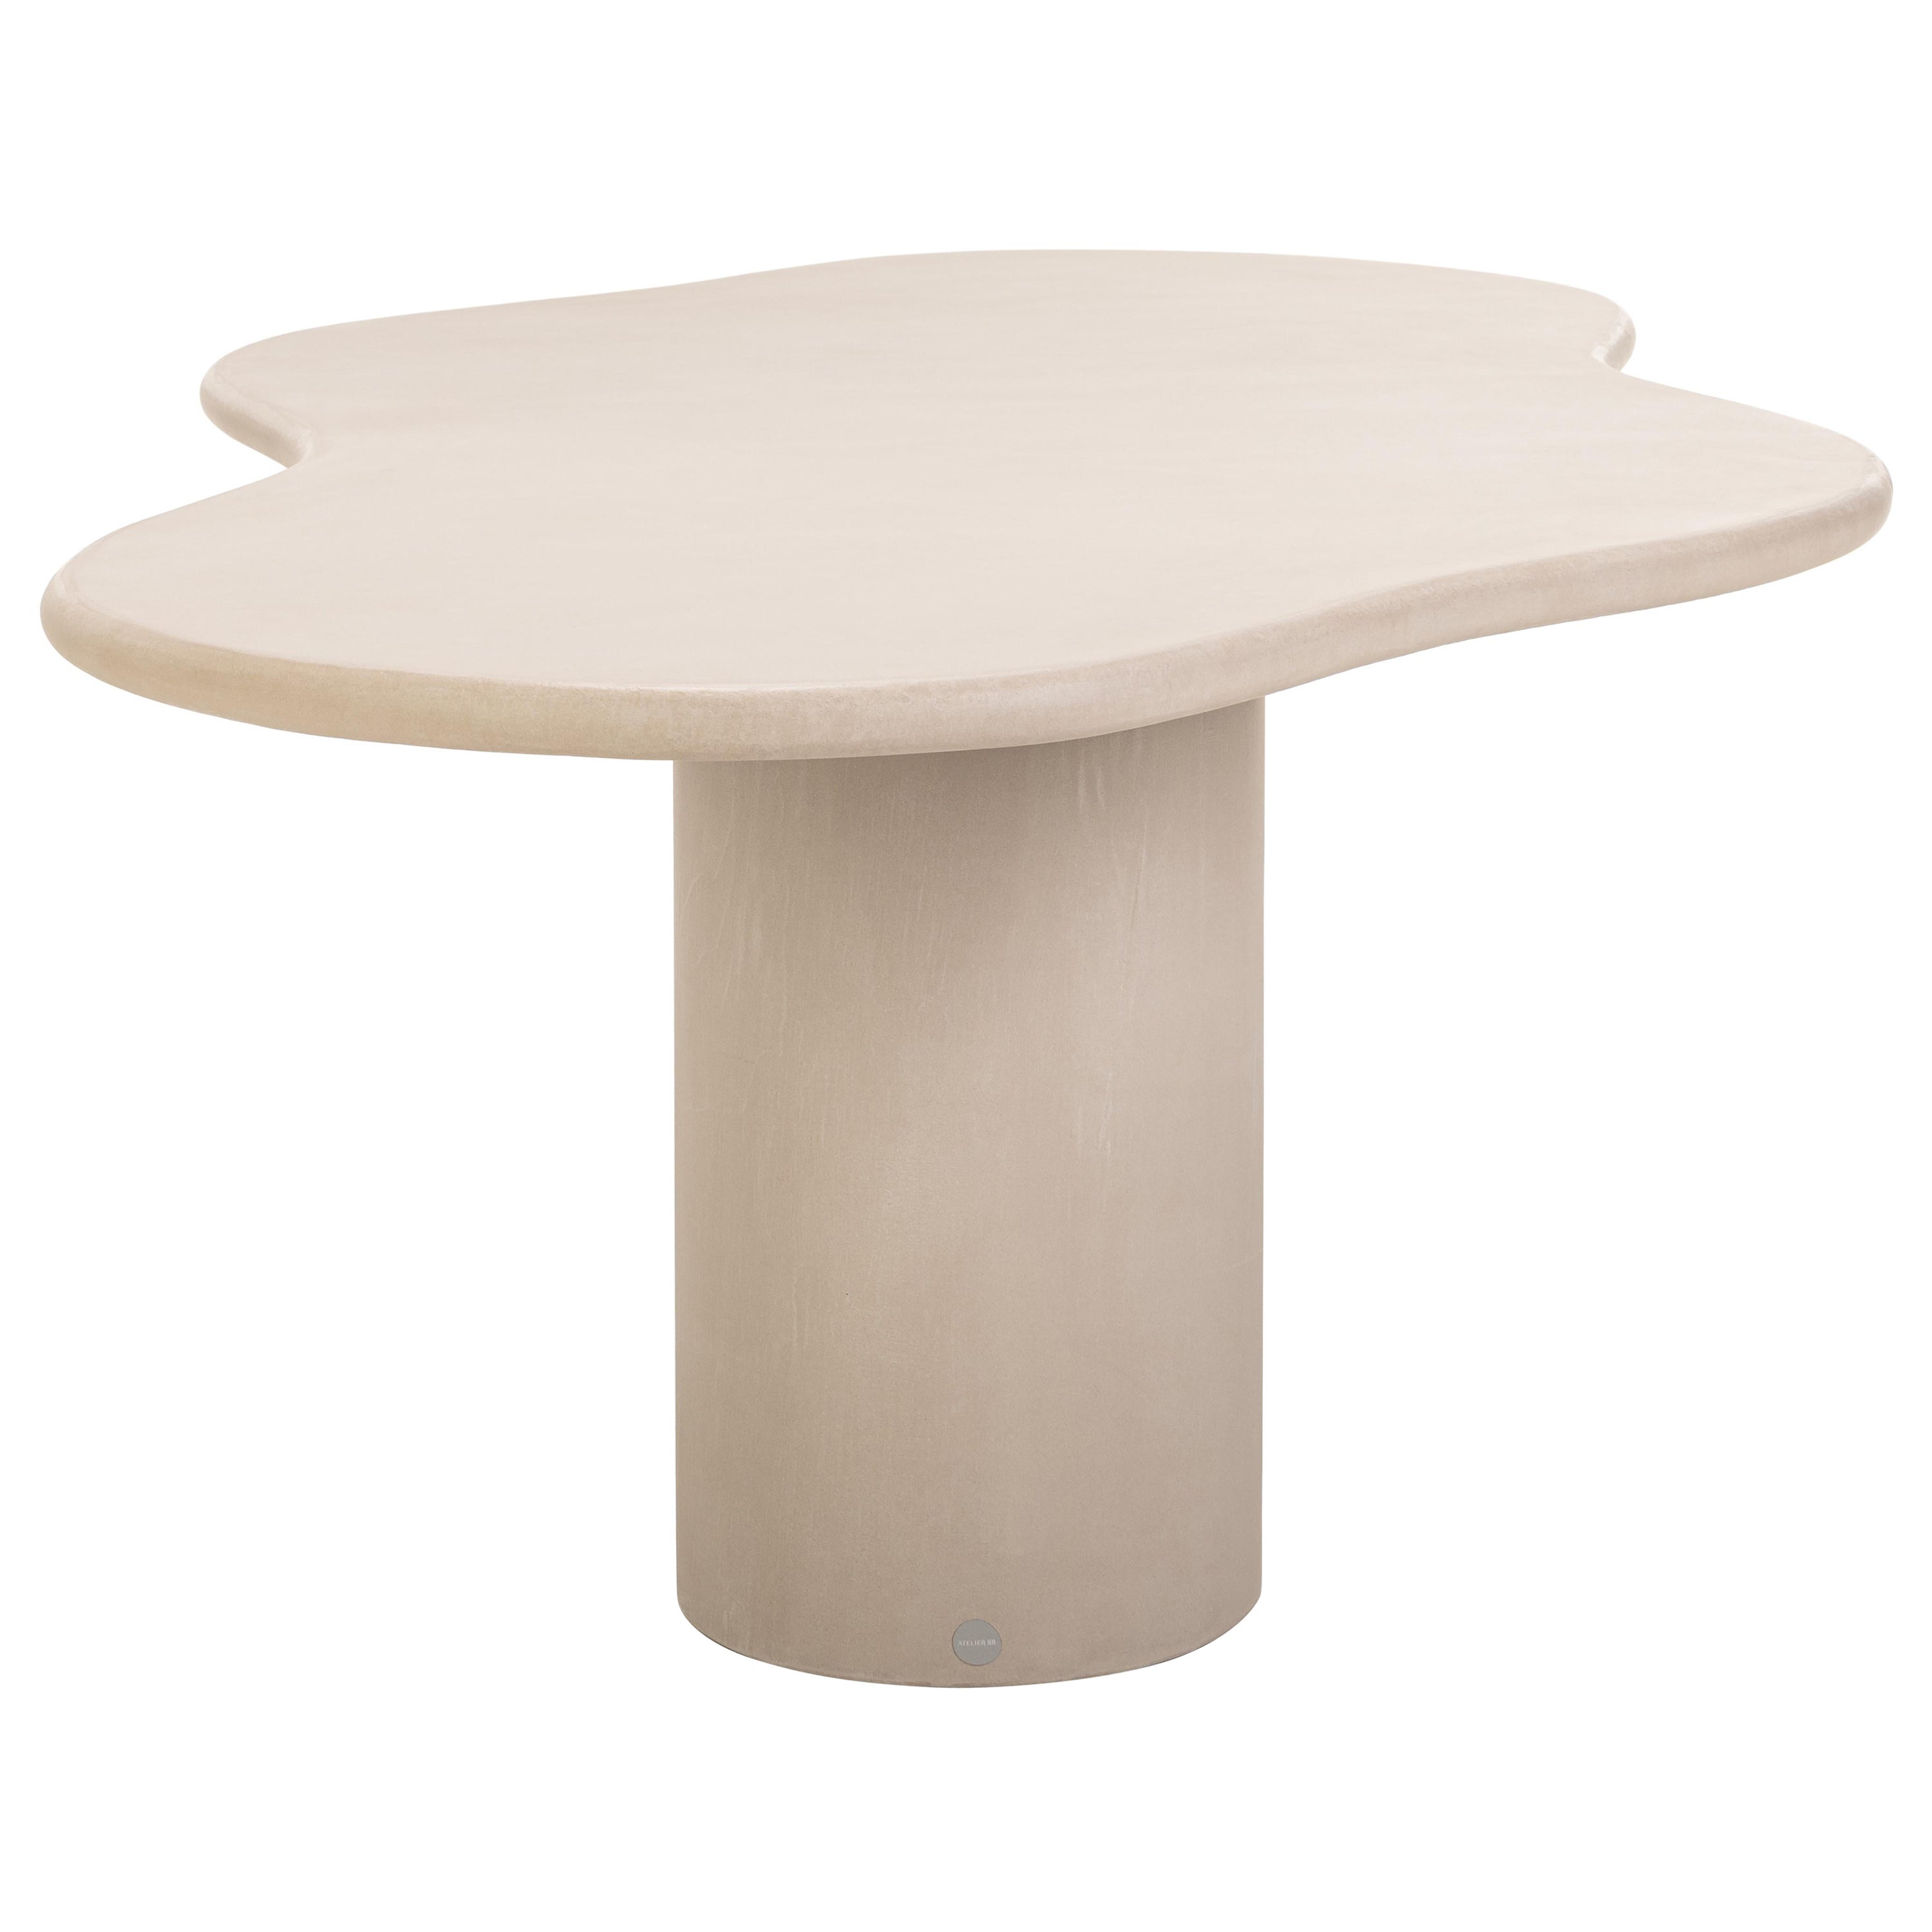 Natural Plaster Dining Table "Fluent" 280 by Isabelle Beaumont